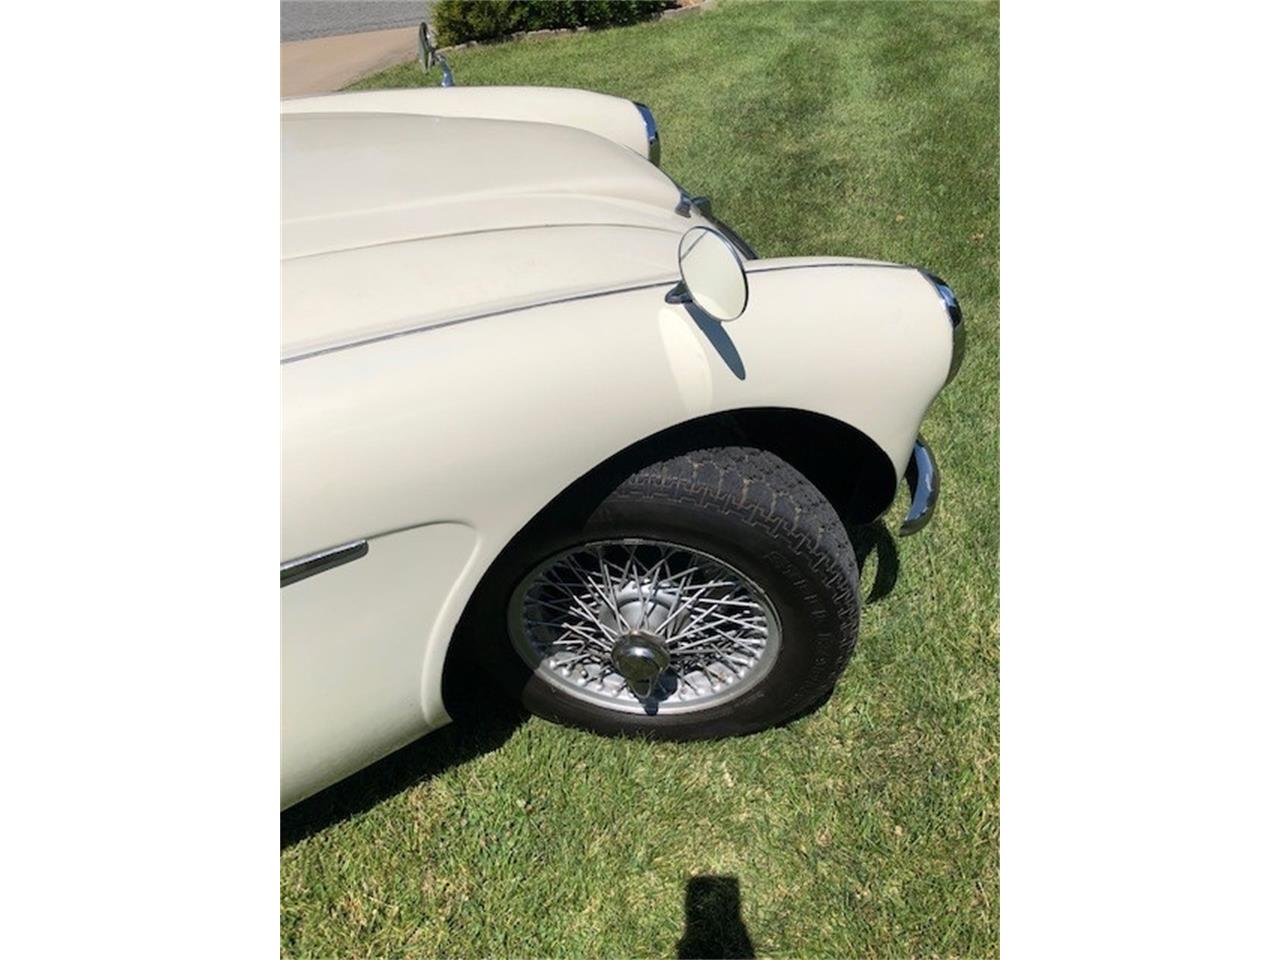 1962 Austin-Healey 3000 Mark III for sale in Fort Myers, FL – photo 6